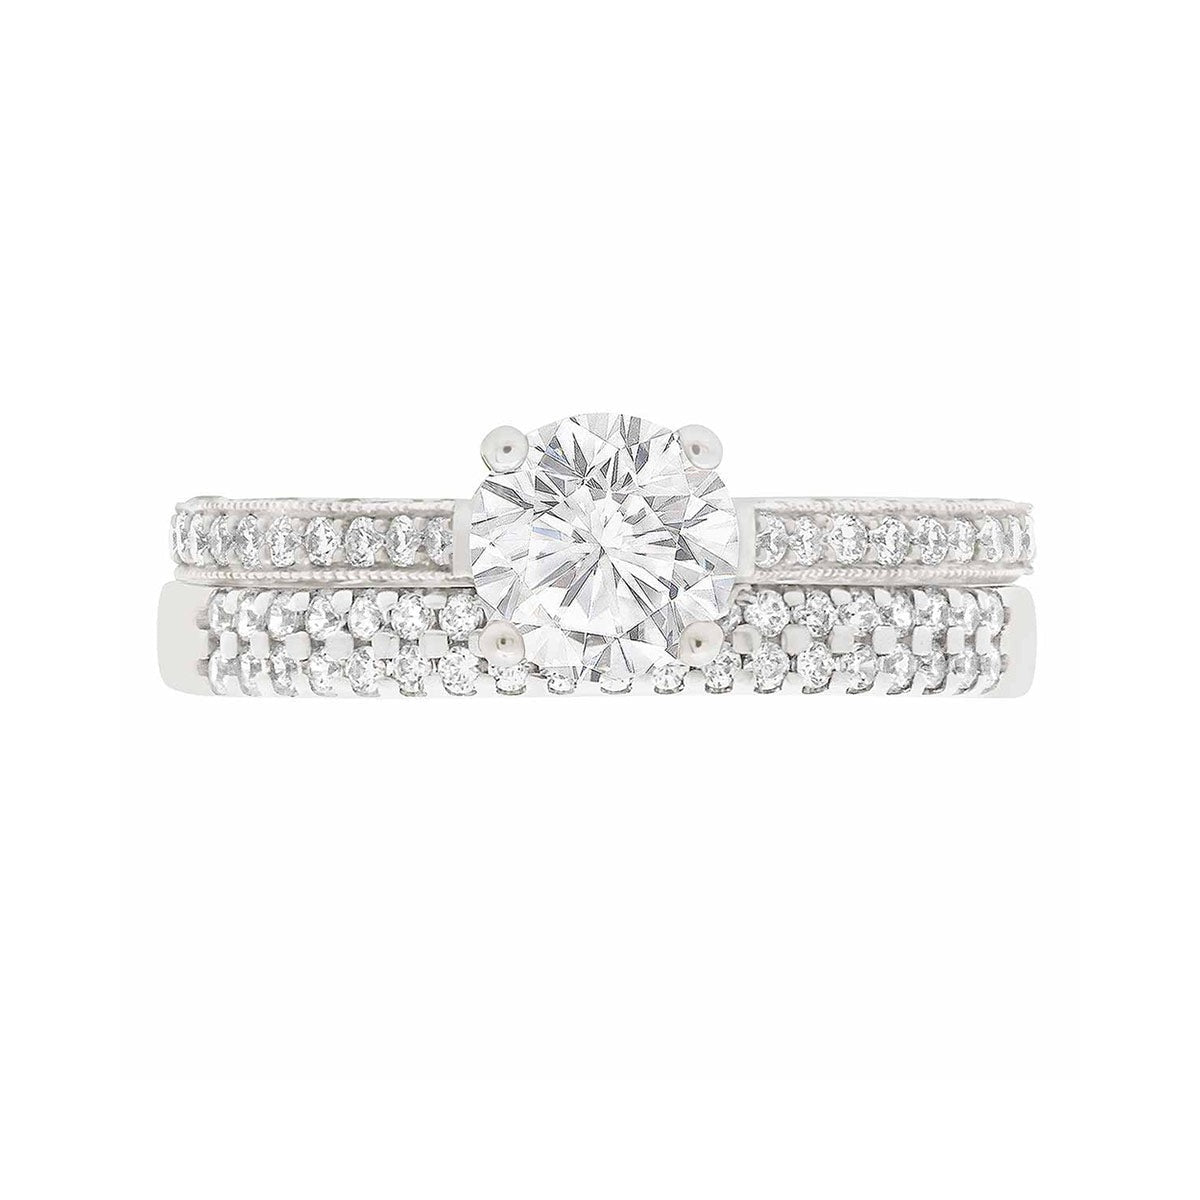 Thin Band Solitaire Ring with diamonds on sidewalls in white gold with matching wedding ring